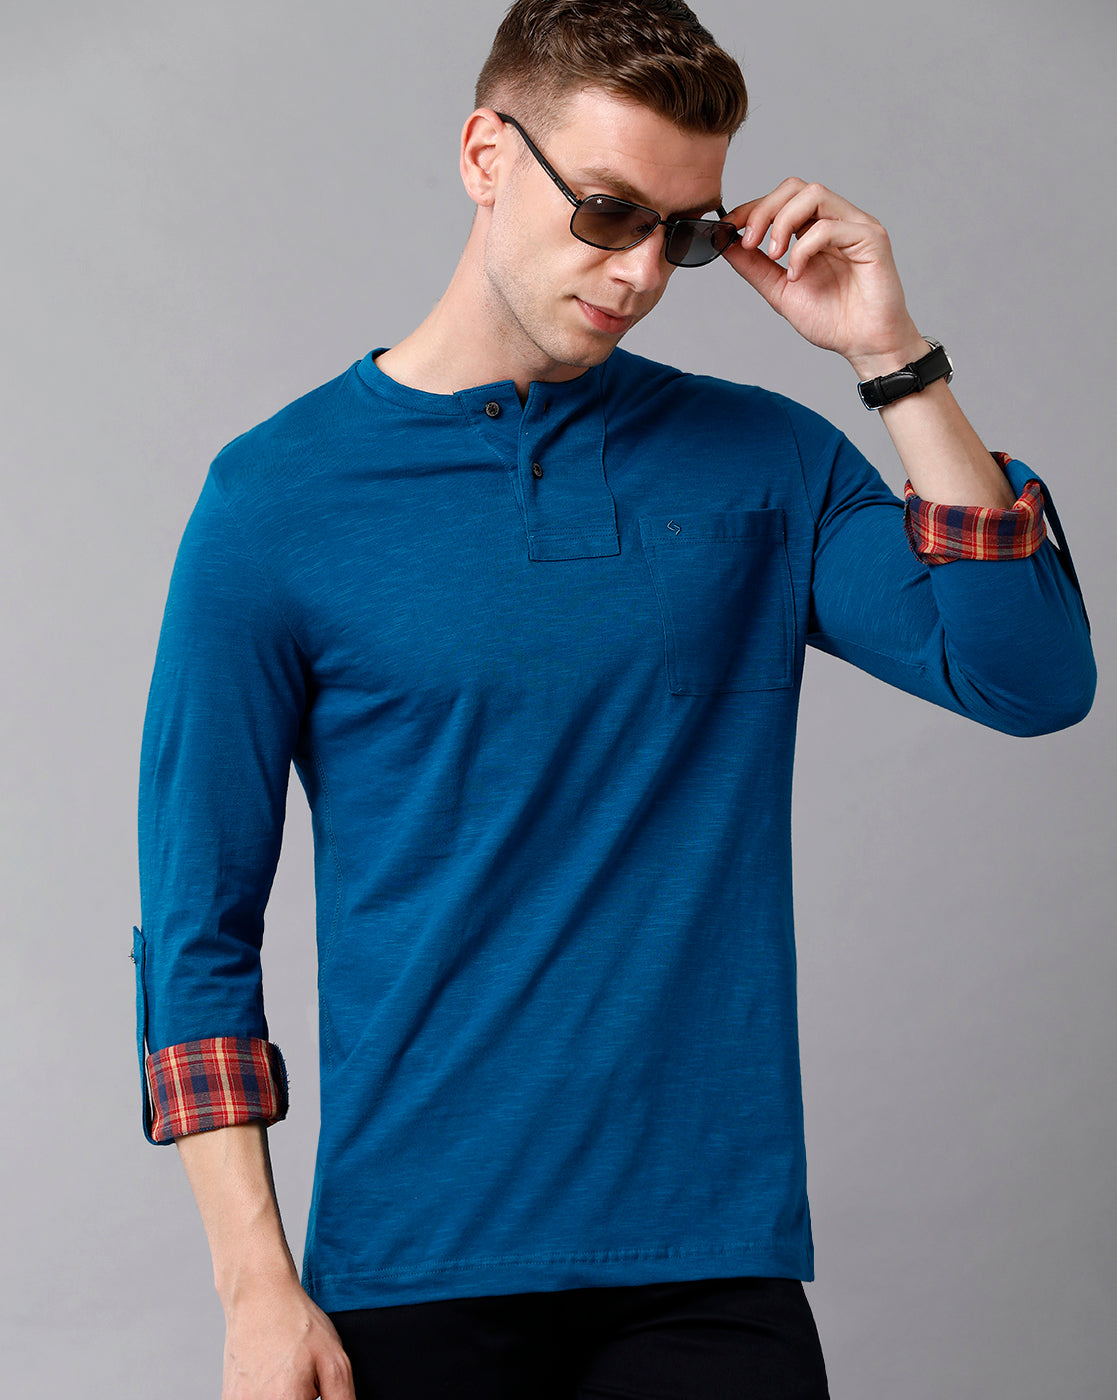 Classic Polo Men's Cotton Solid Full Sleeve Slim Fit Round Neck Royal Blue Color T-Shirt | Baleno Fs - 485 A